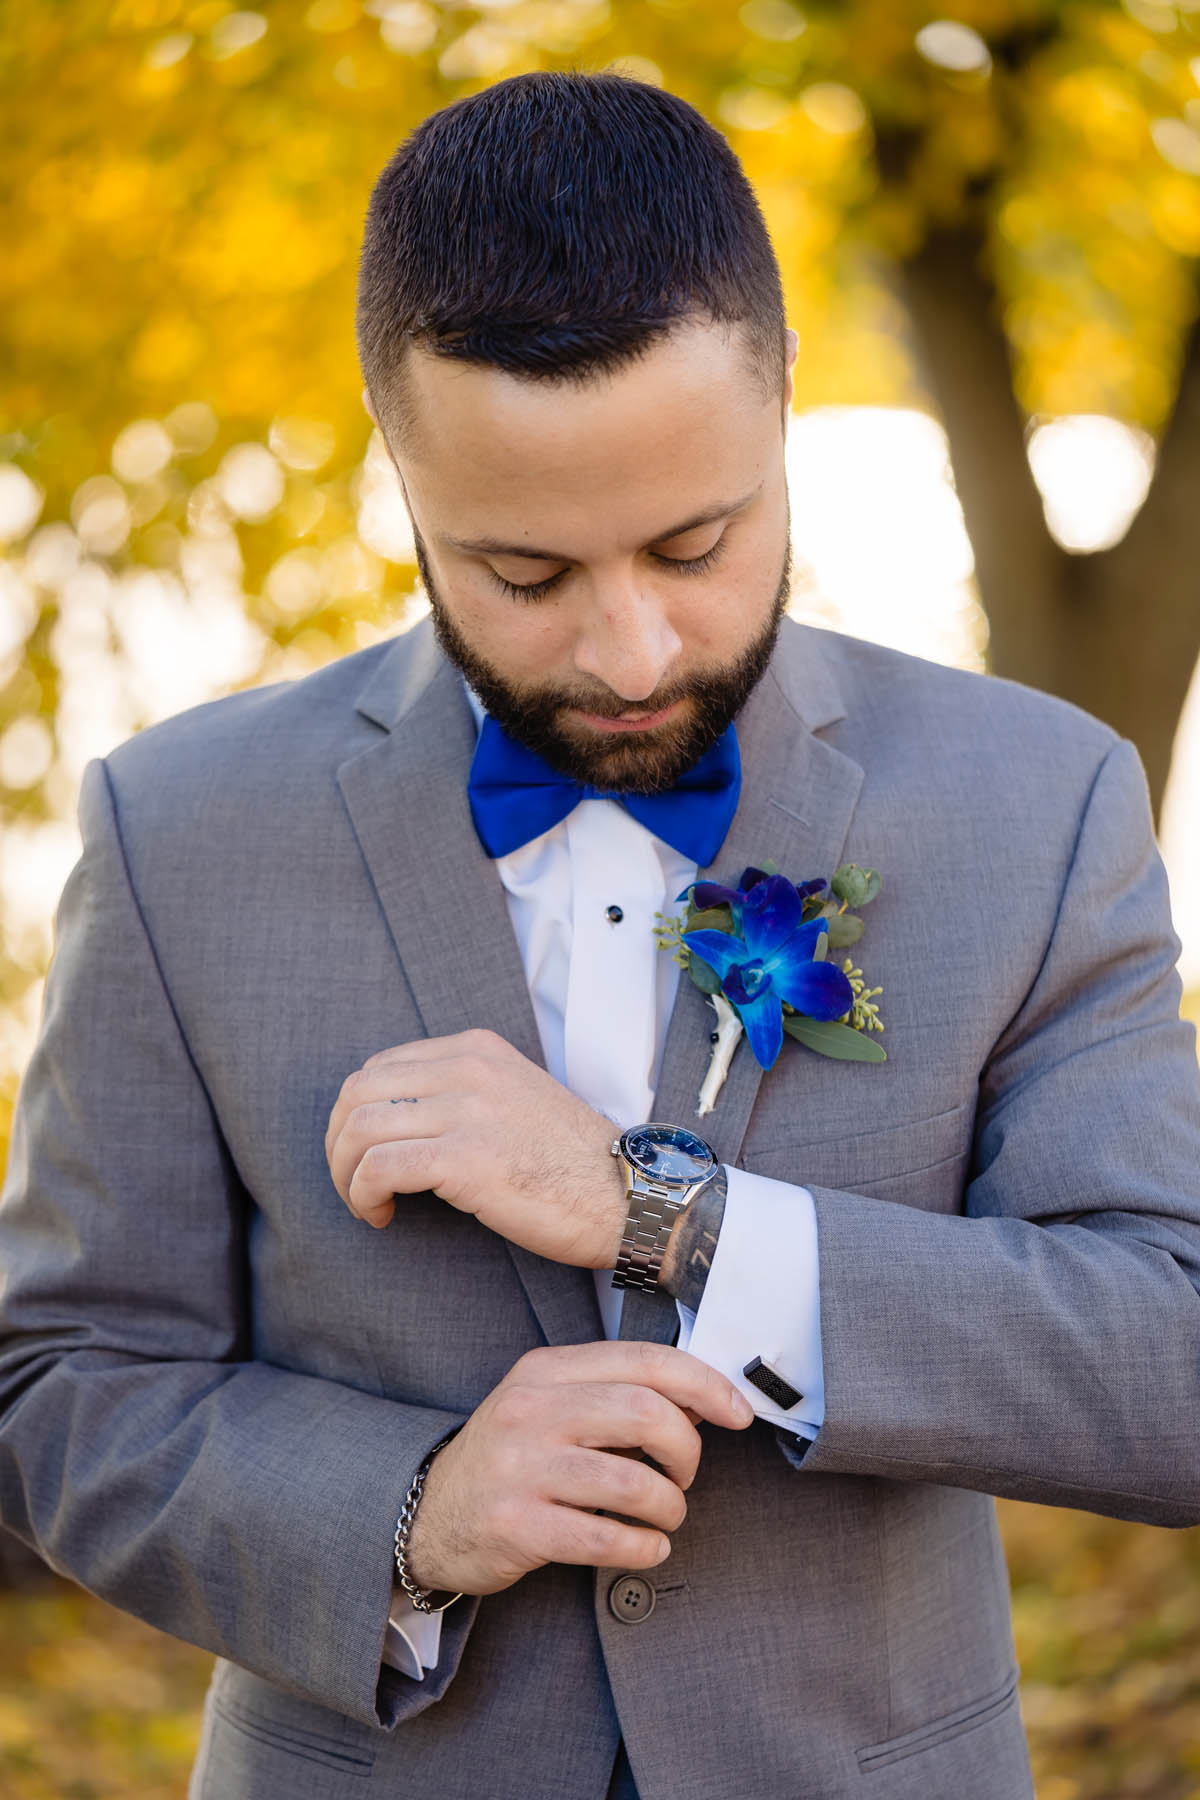 A person with short brown hair and a beard adjusts his cuff links. He is wearing a gray suit with blue tie and boutenniere. 